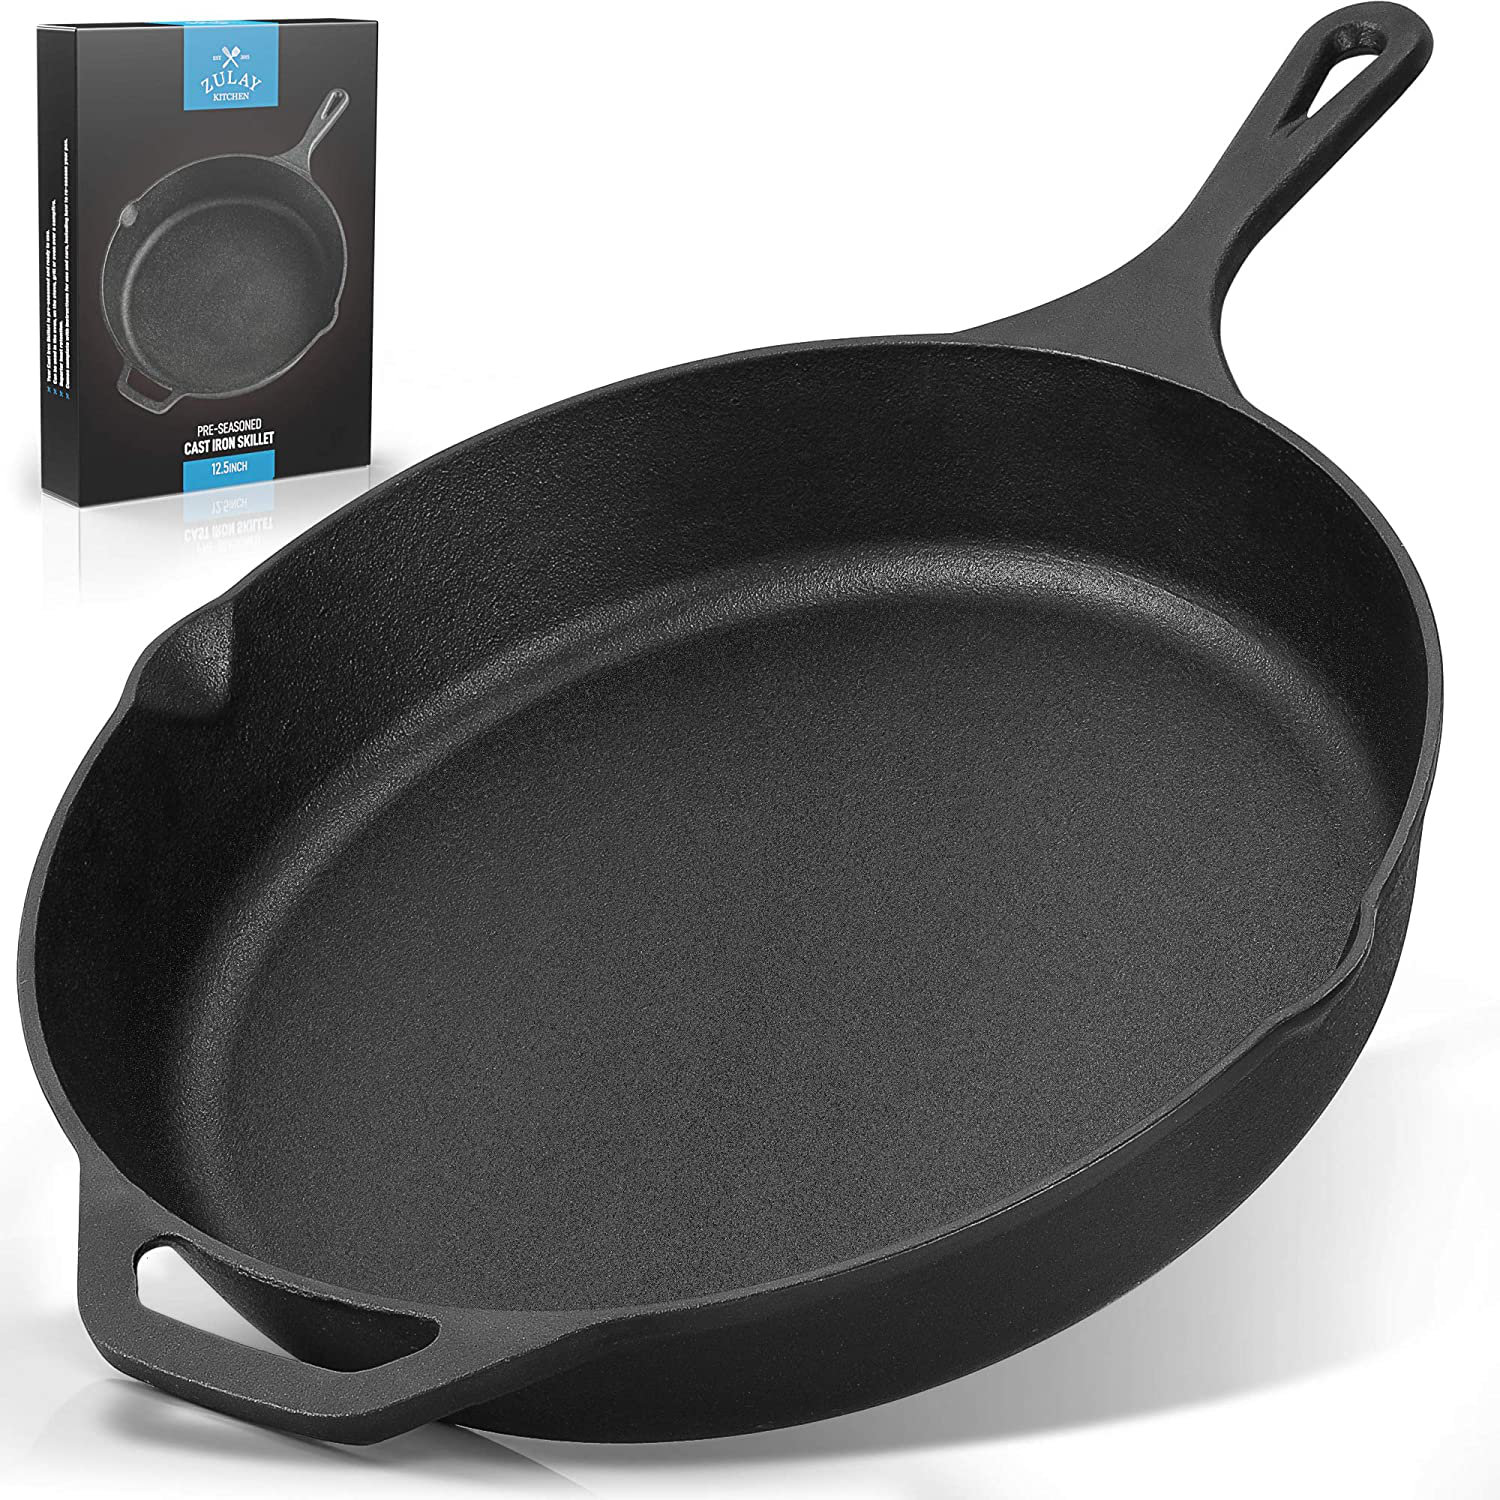 Cast Iron Skillet - 12 Inch Versatile and Durable Cast Iron Pan - Multi Use  Premium Quality Kitchen Pans - Pre-Seasoned Round Big Frying Pan for Oven